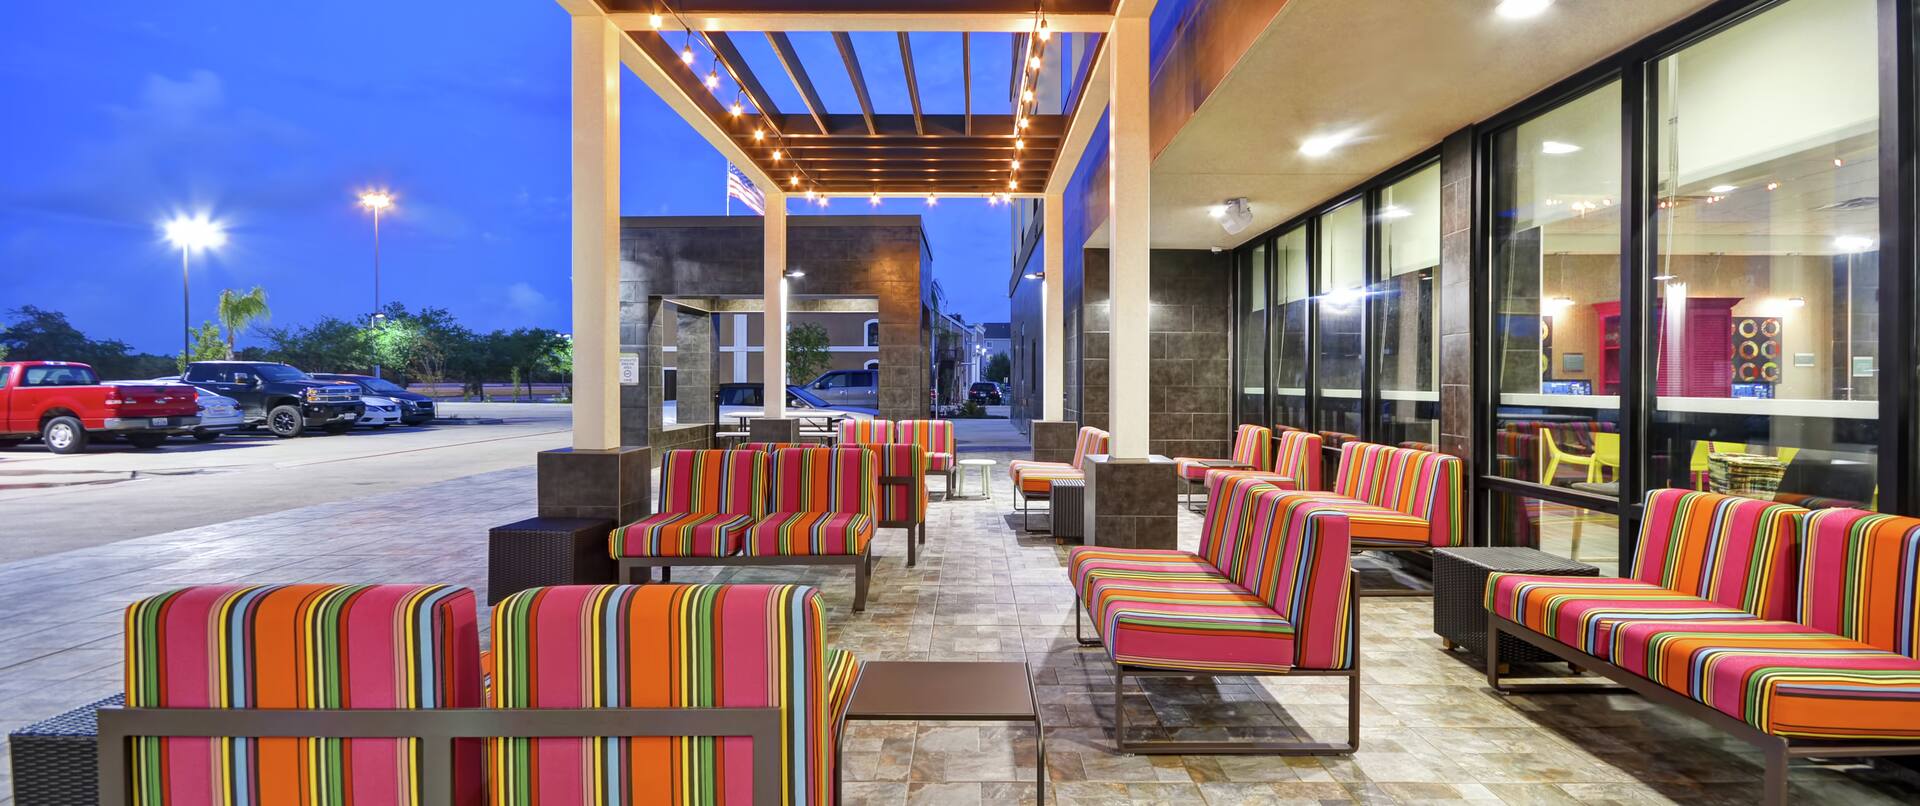 Patio with Seating at Dusk